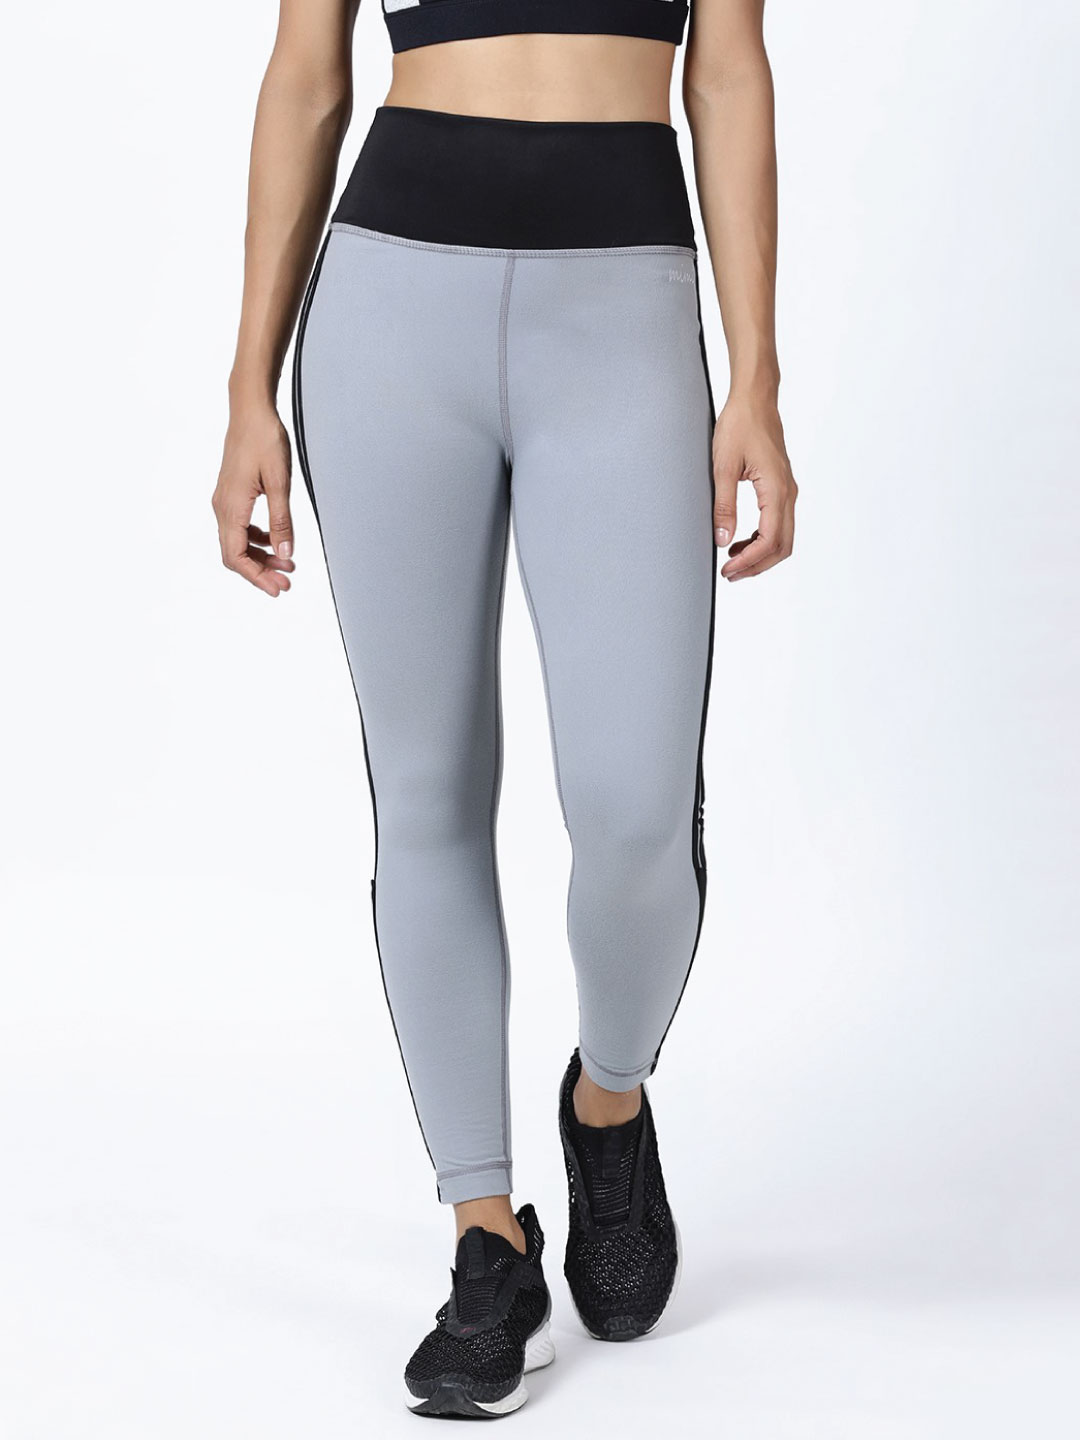 Vertical Striped Leggings for Women – Elongate Forever in Cement and Black  – MICHELLE SALINS